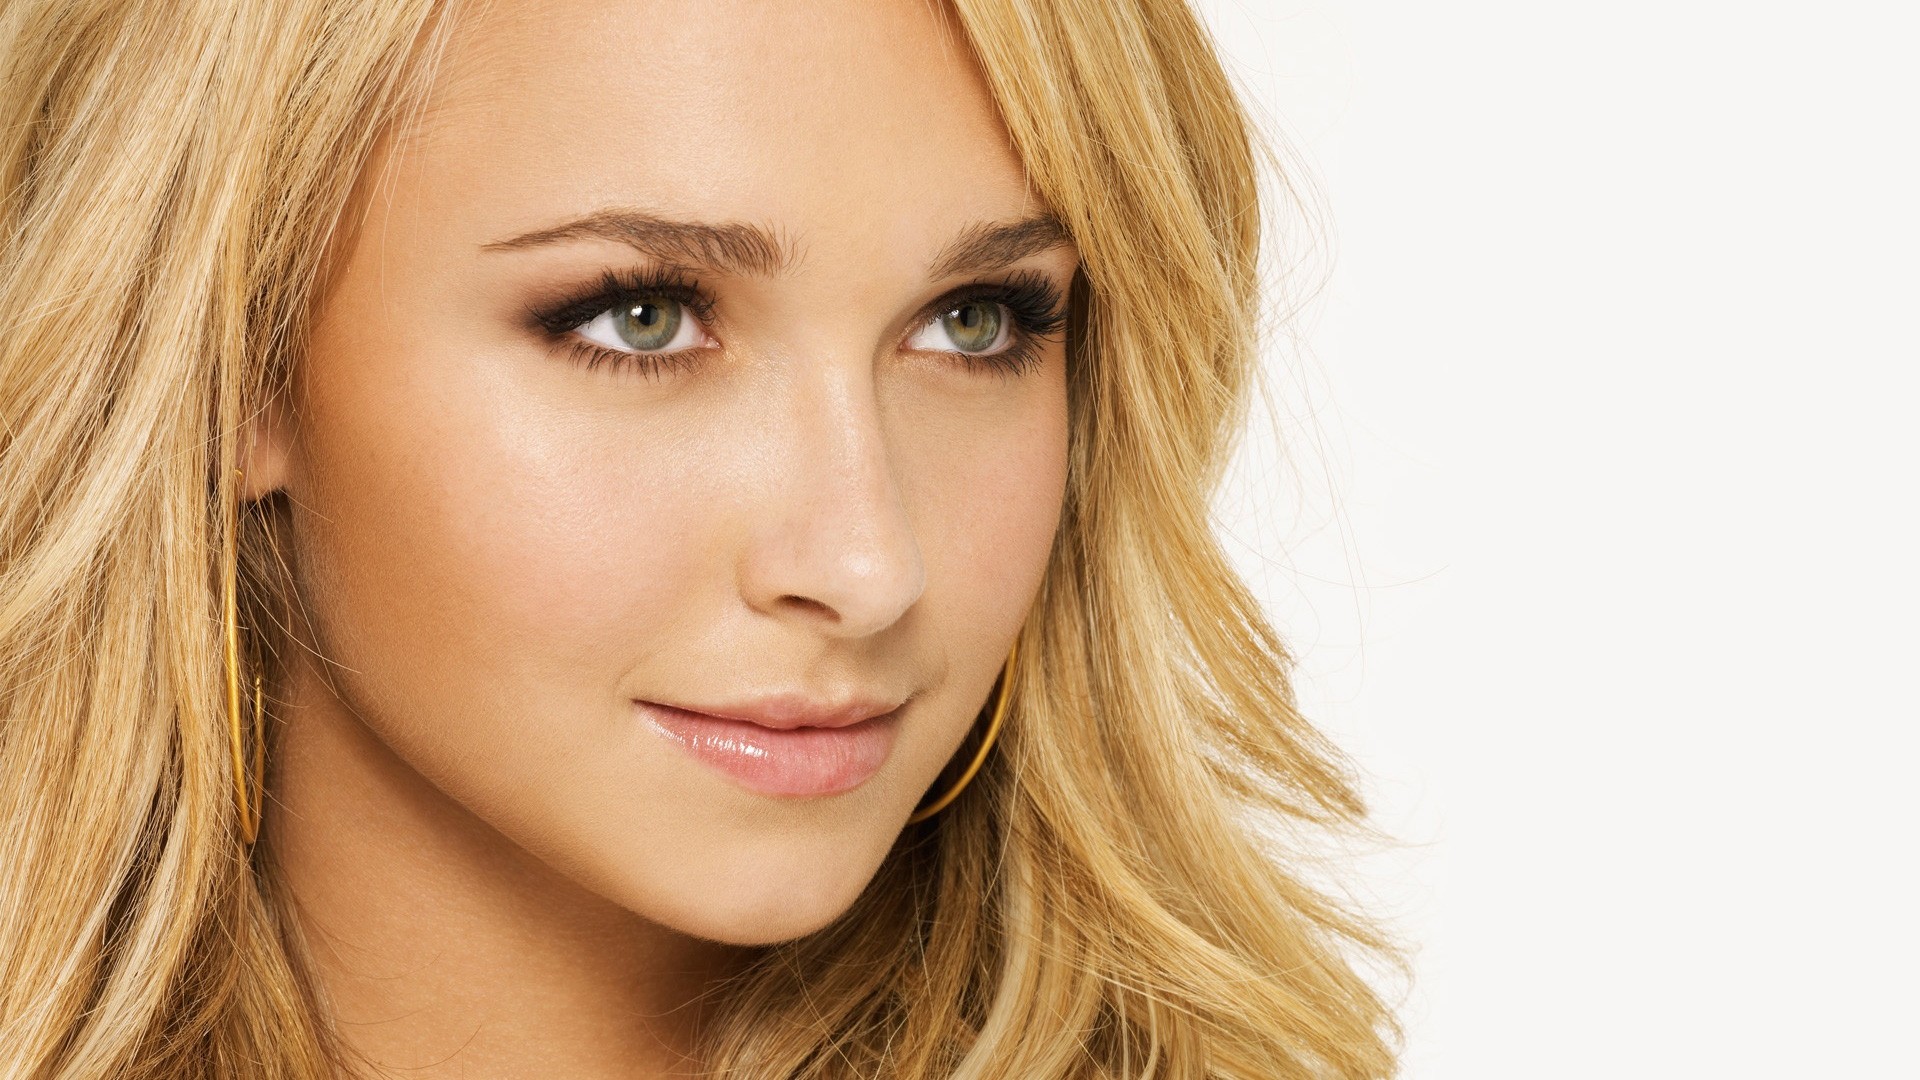 1920x1080 Download now full hd wallpaper hayden panettiere face mascara pretty smile  ...